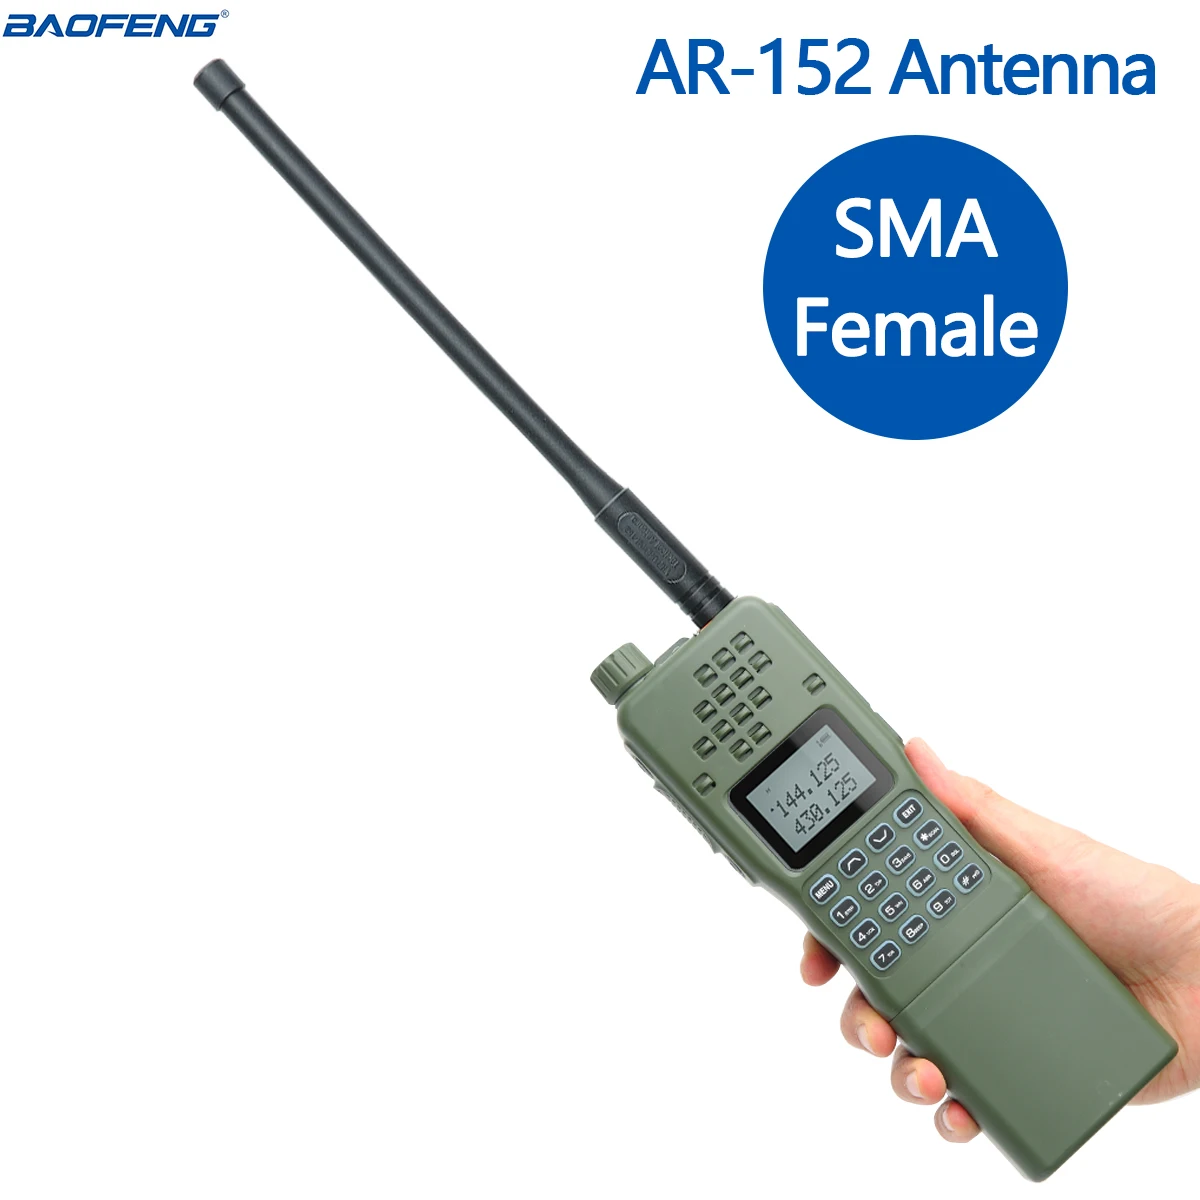 ABBREE AR-152C Foldable Tactical Antenna 18.89 inch with SMA-Female Connector BF-888S Two Way Radios Compatible with UV-5R 136-174MHz, 400-520MHz Dual Band VHF/UHF UV-82 BF-F8HP 